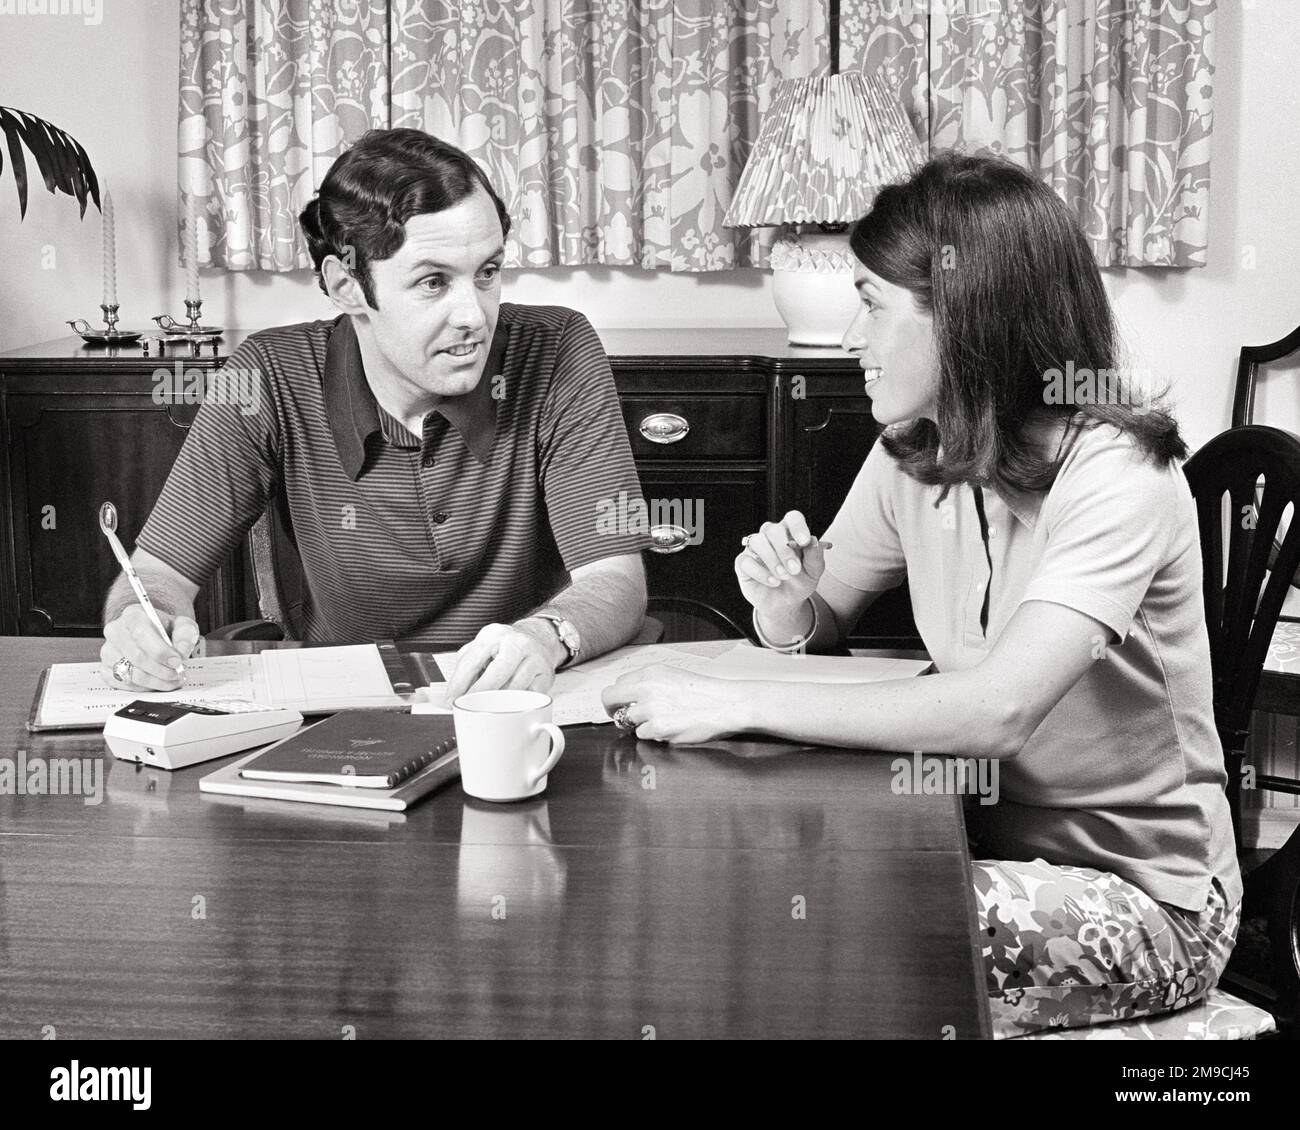 1970s COUPLE SITTING AT DINING ROOM TABLE GOING OVER BILLS SCHEDULES CALENDAR HOUSEHOLD BUDGET - s20347 HAR001 HARS 1 CALCULATOR HOUSEHOLD BUDGET STYLE COMMUNICATION YOUNG ADULT TEAMWORK INFORMATION LIFESTYLE SATISFACTION FEMALES MARRIED SPOUSE HUSBANDS HOME LIFE FINANCES COPY SPACE FRIENDSHIP HALF-LENGTH LADIES PERSONS MALES B&W PARTNER BRUNETTE HAPPINESS HIGH ANGLE CHECKBOOK CONNECTION MUG SUPPORT DINING ROOM CHECKS COOPERATION TOGETHERNESS WIVES YOUNG ADULT MAN BLACK AND WHITE CAUCASIAN ETHNICITY HAR001 OLD FASHIONED Stock Photo